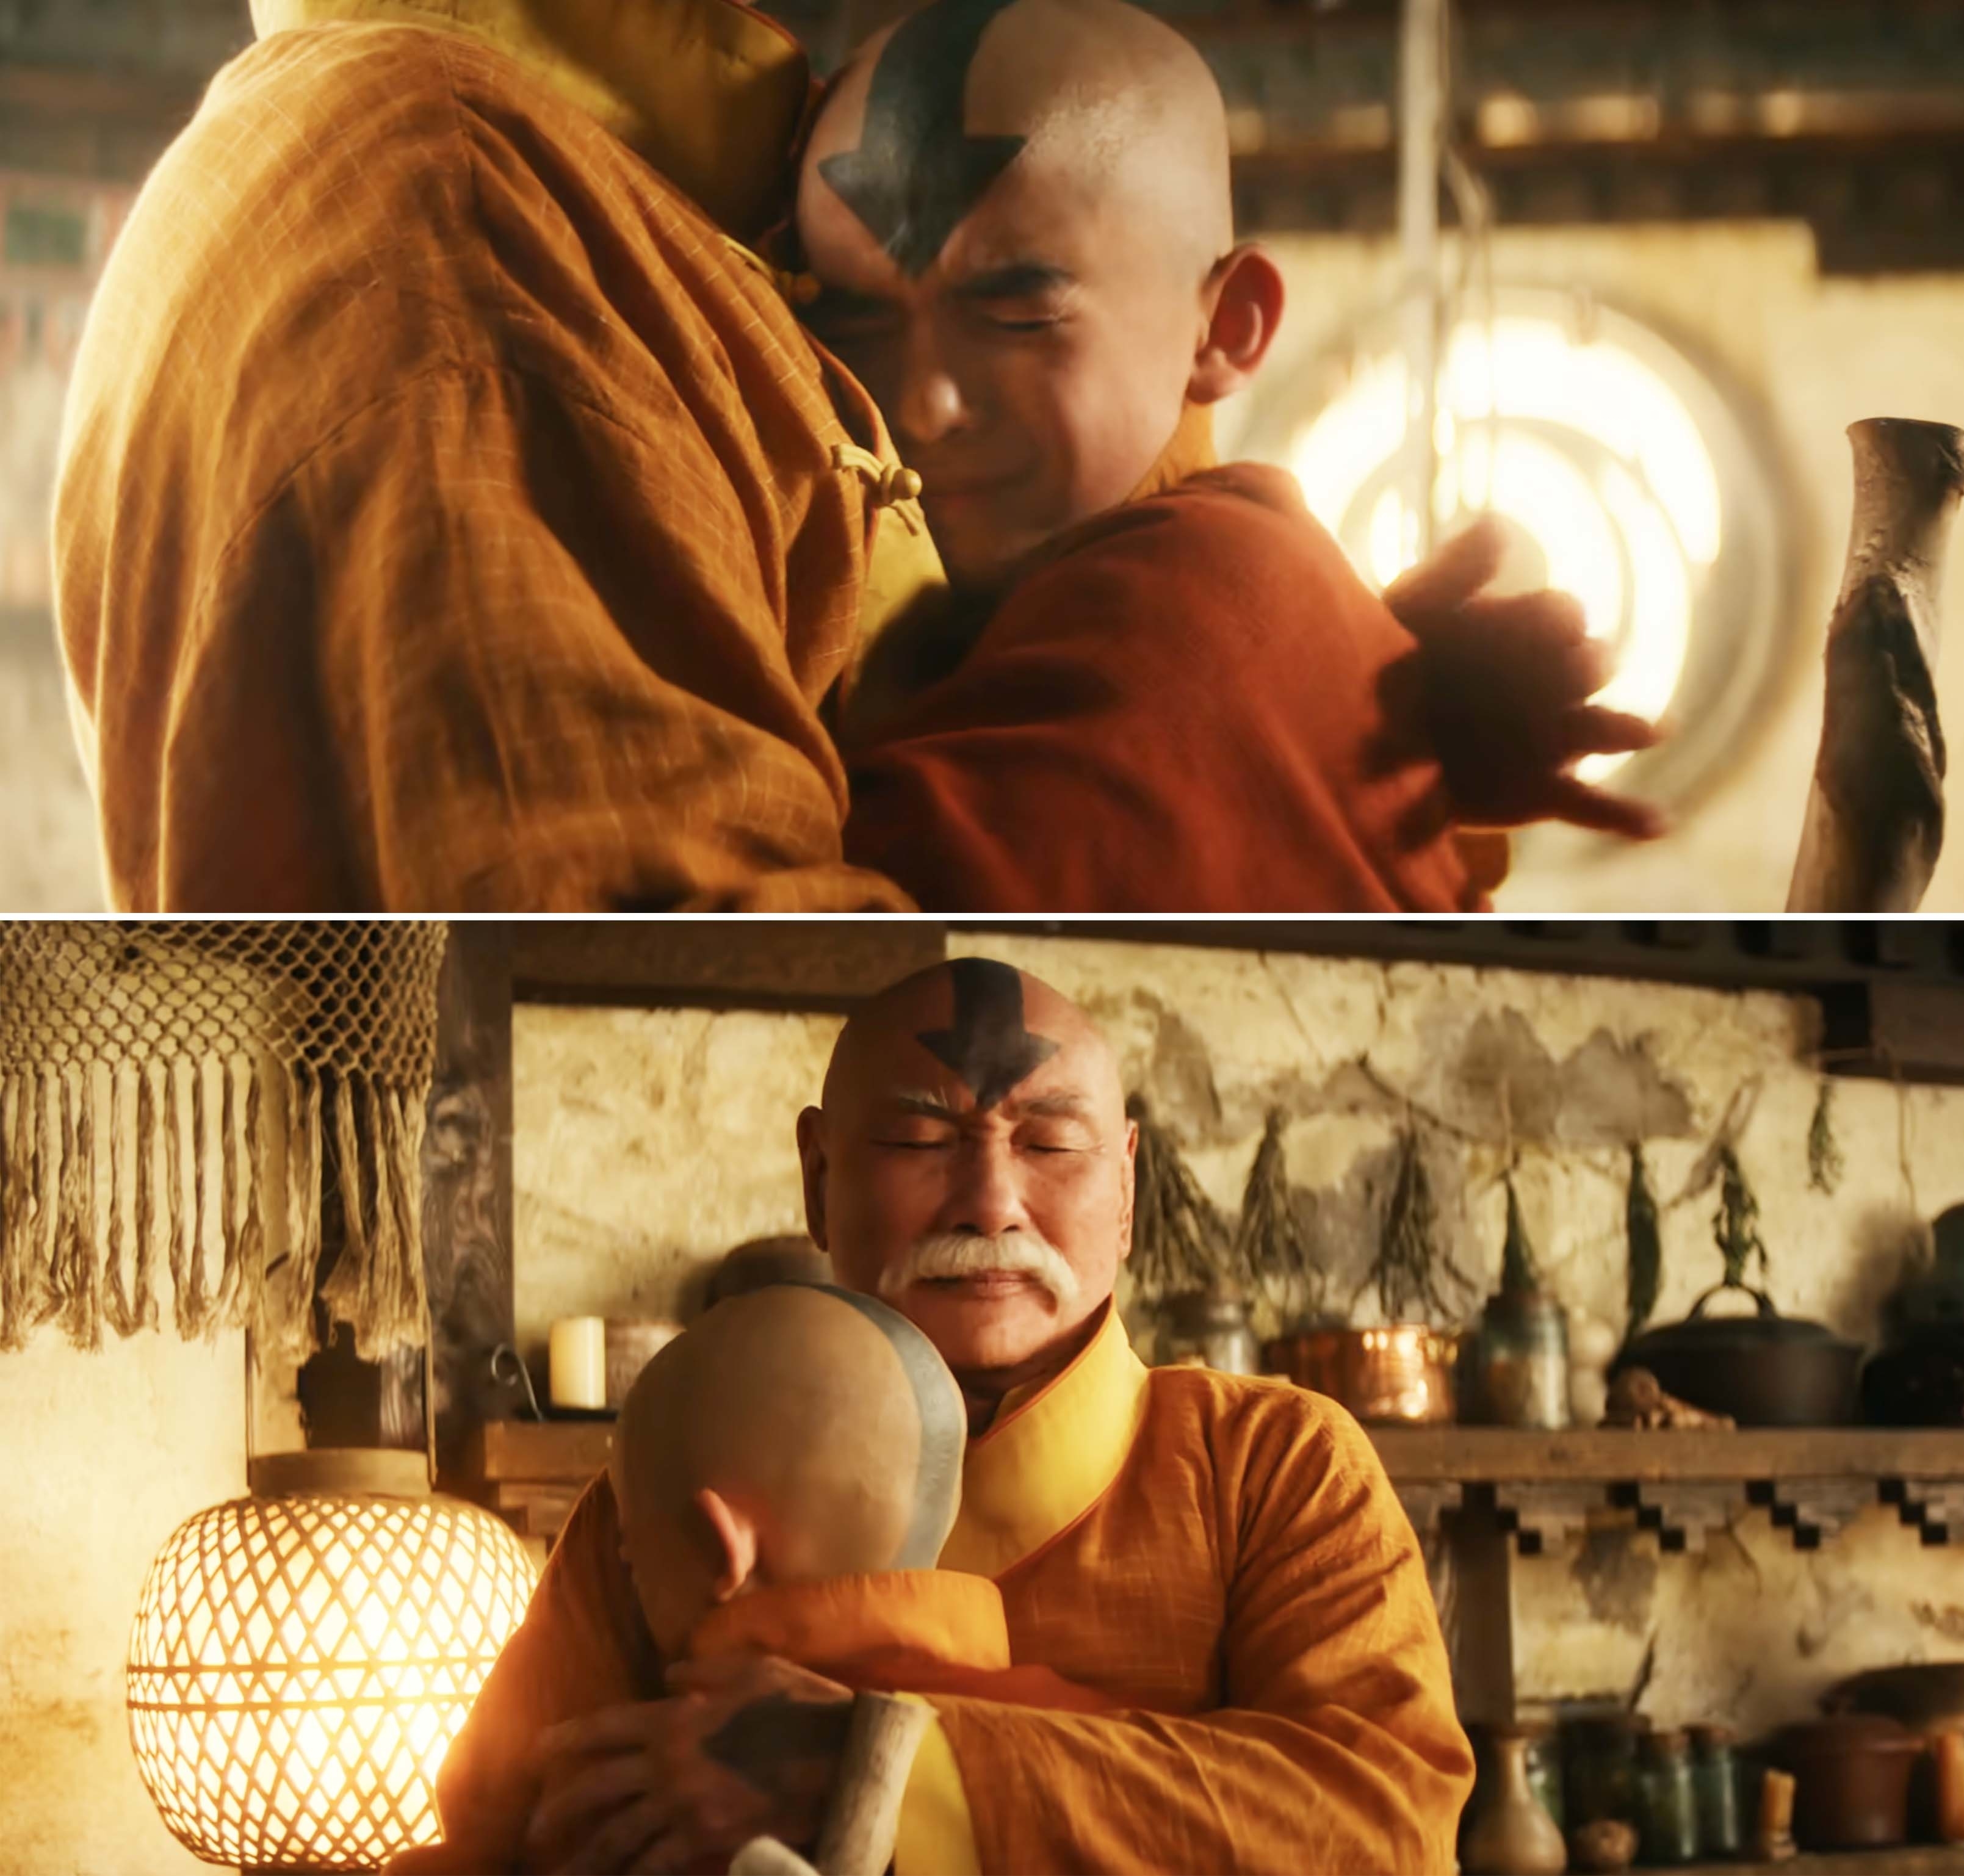 Two scenes from a TV show featuring animated characters Aang embracing Monk Gyatso, expressing a heartfelt moment